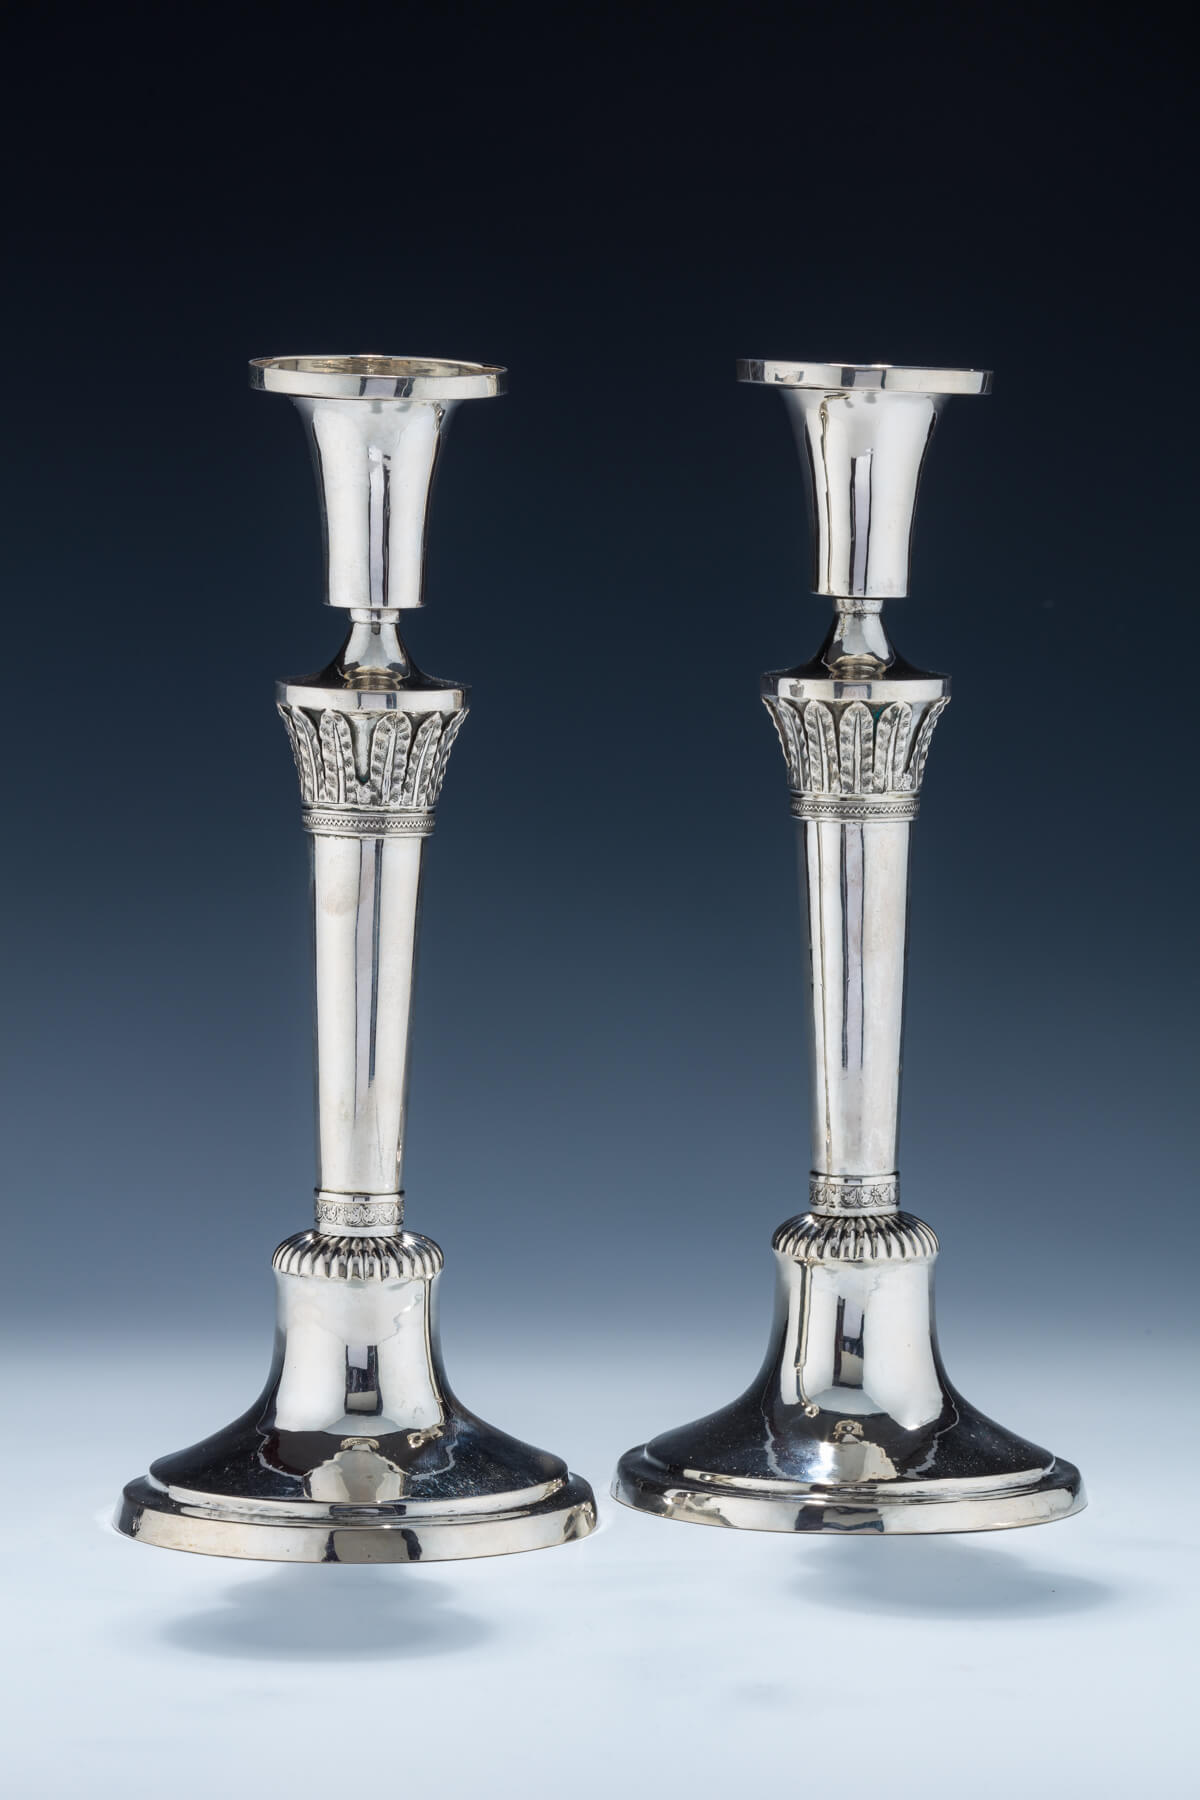 42. An Early Pair of Silver Candlesticks